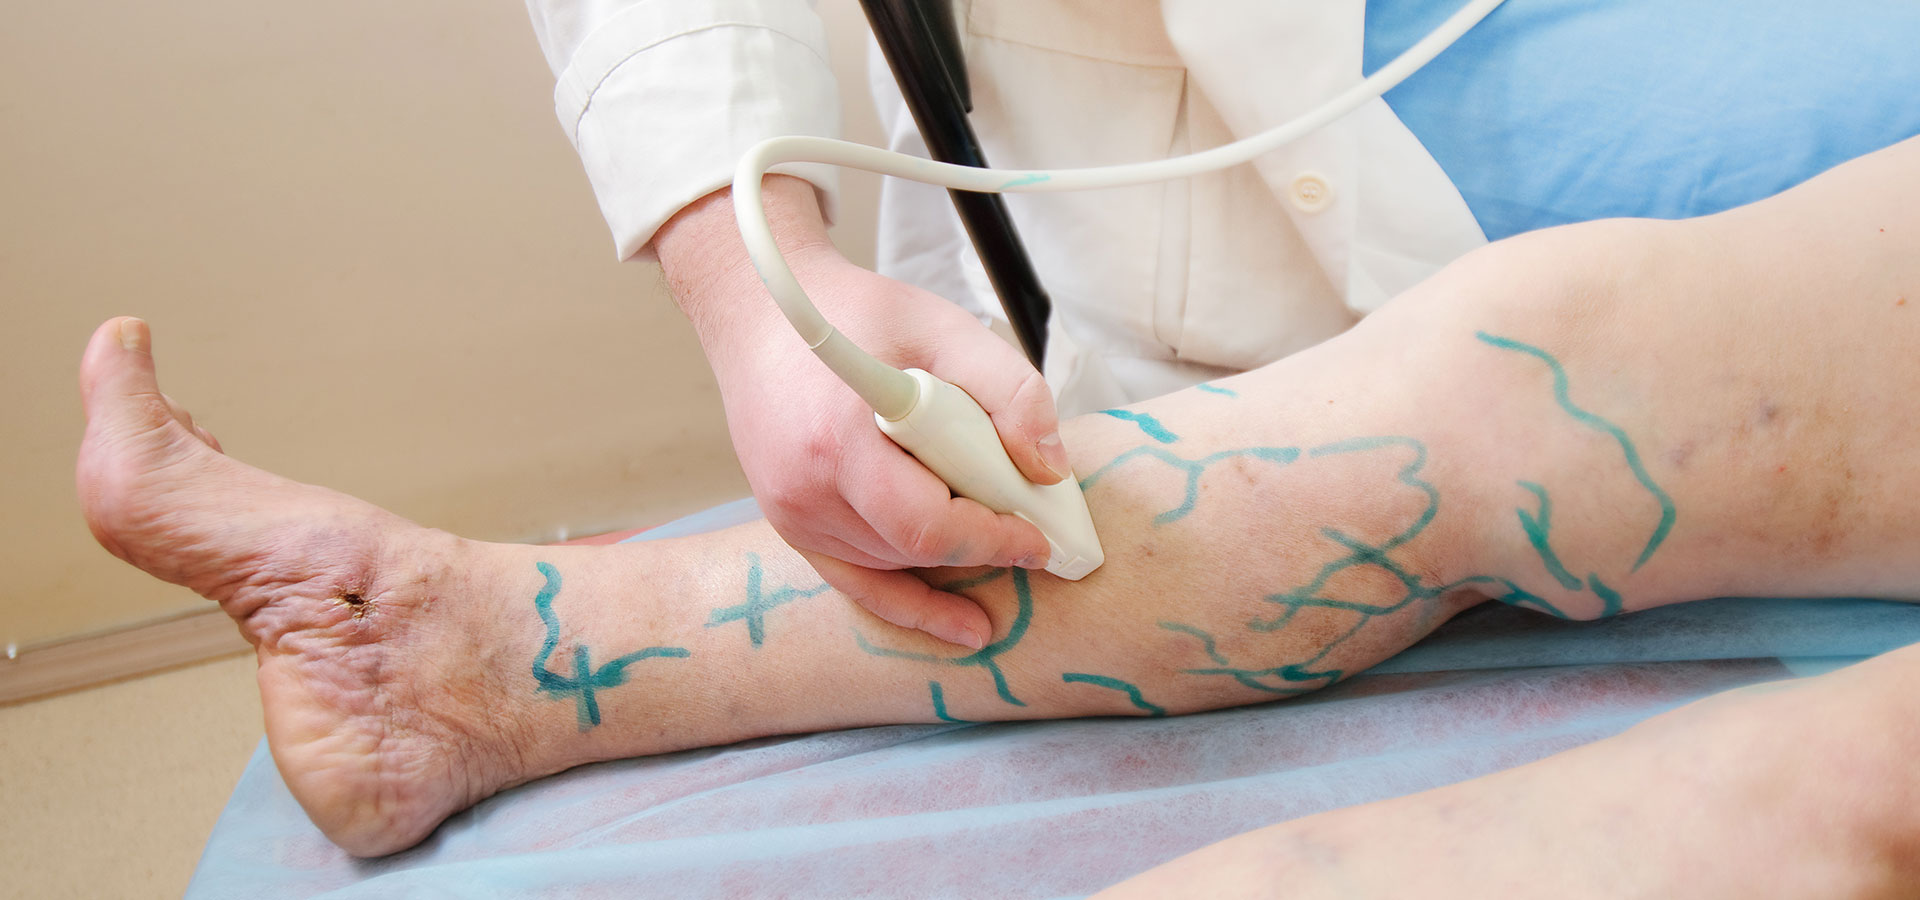 Varicose Veins and Spider Veins Causes and Treatments